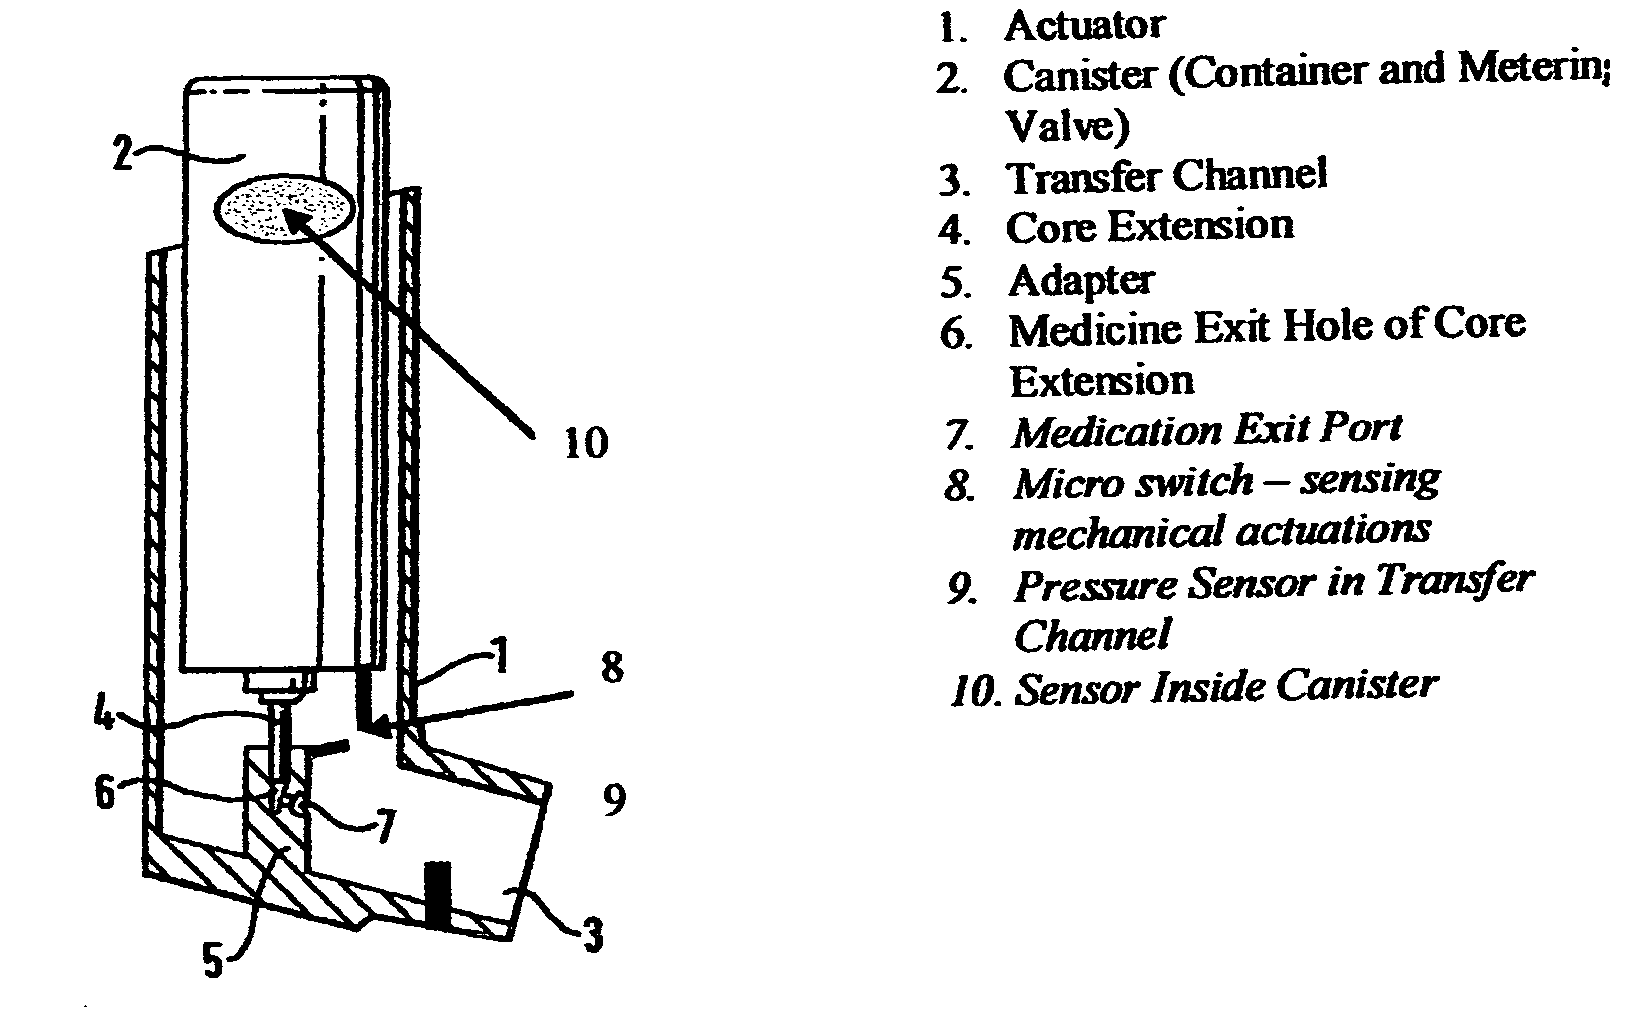 Apparatus for dispensing pressurized contents